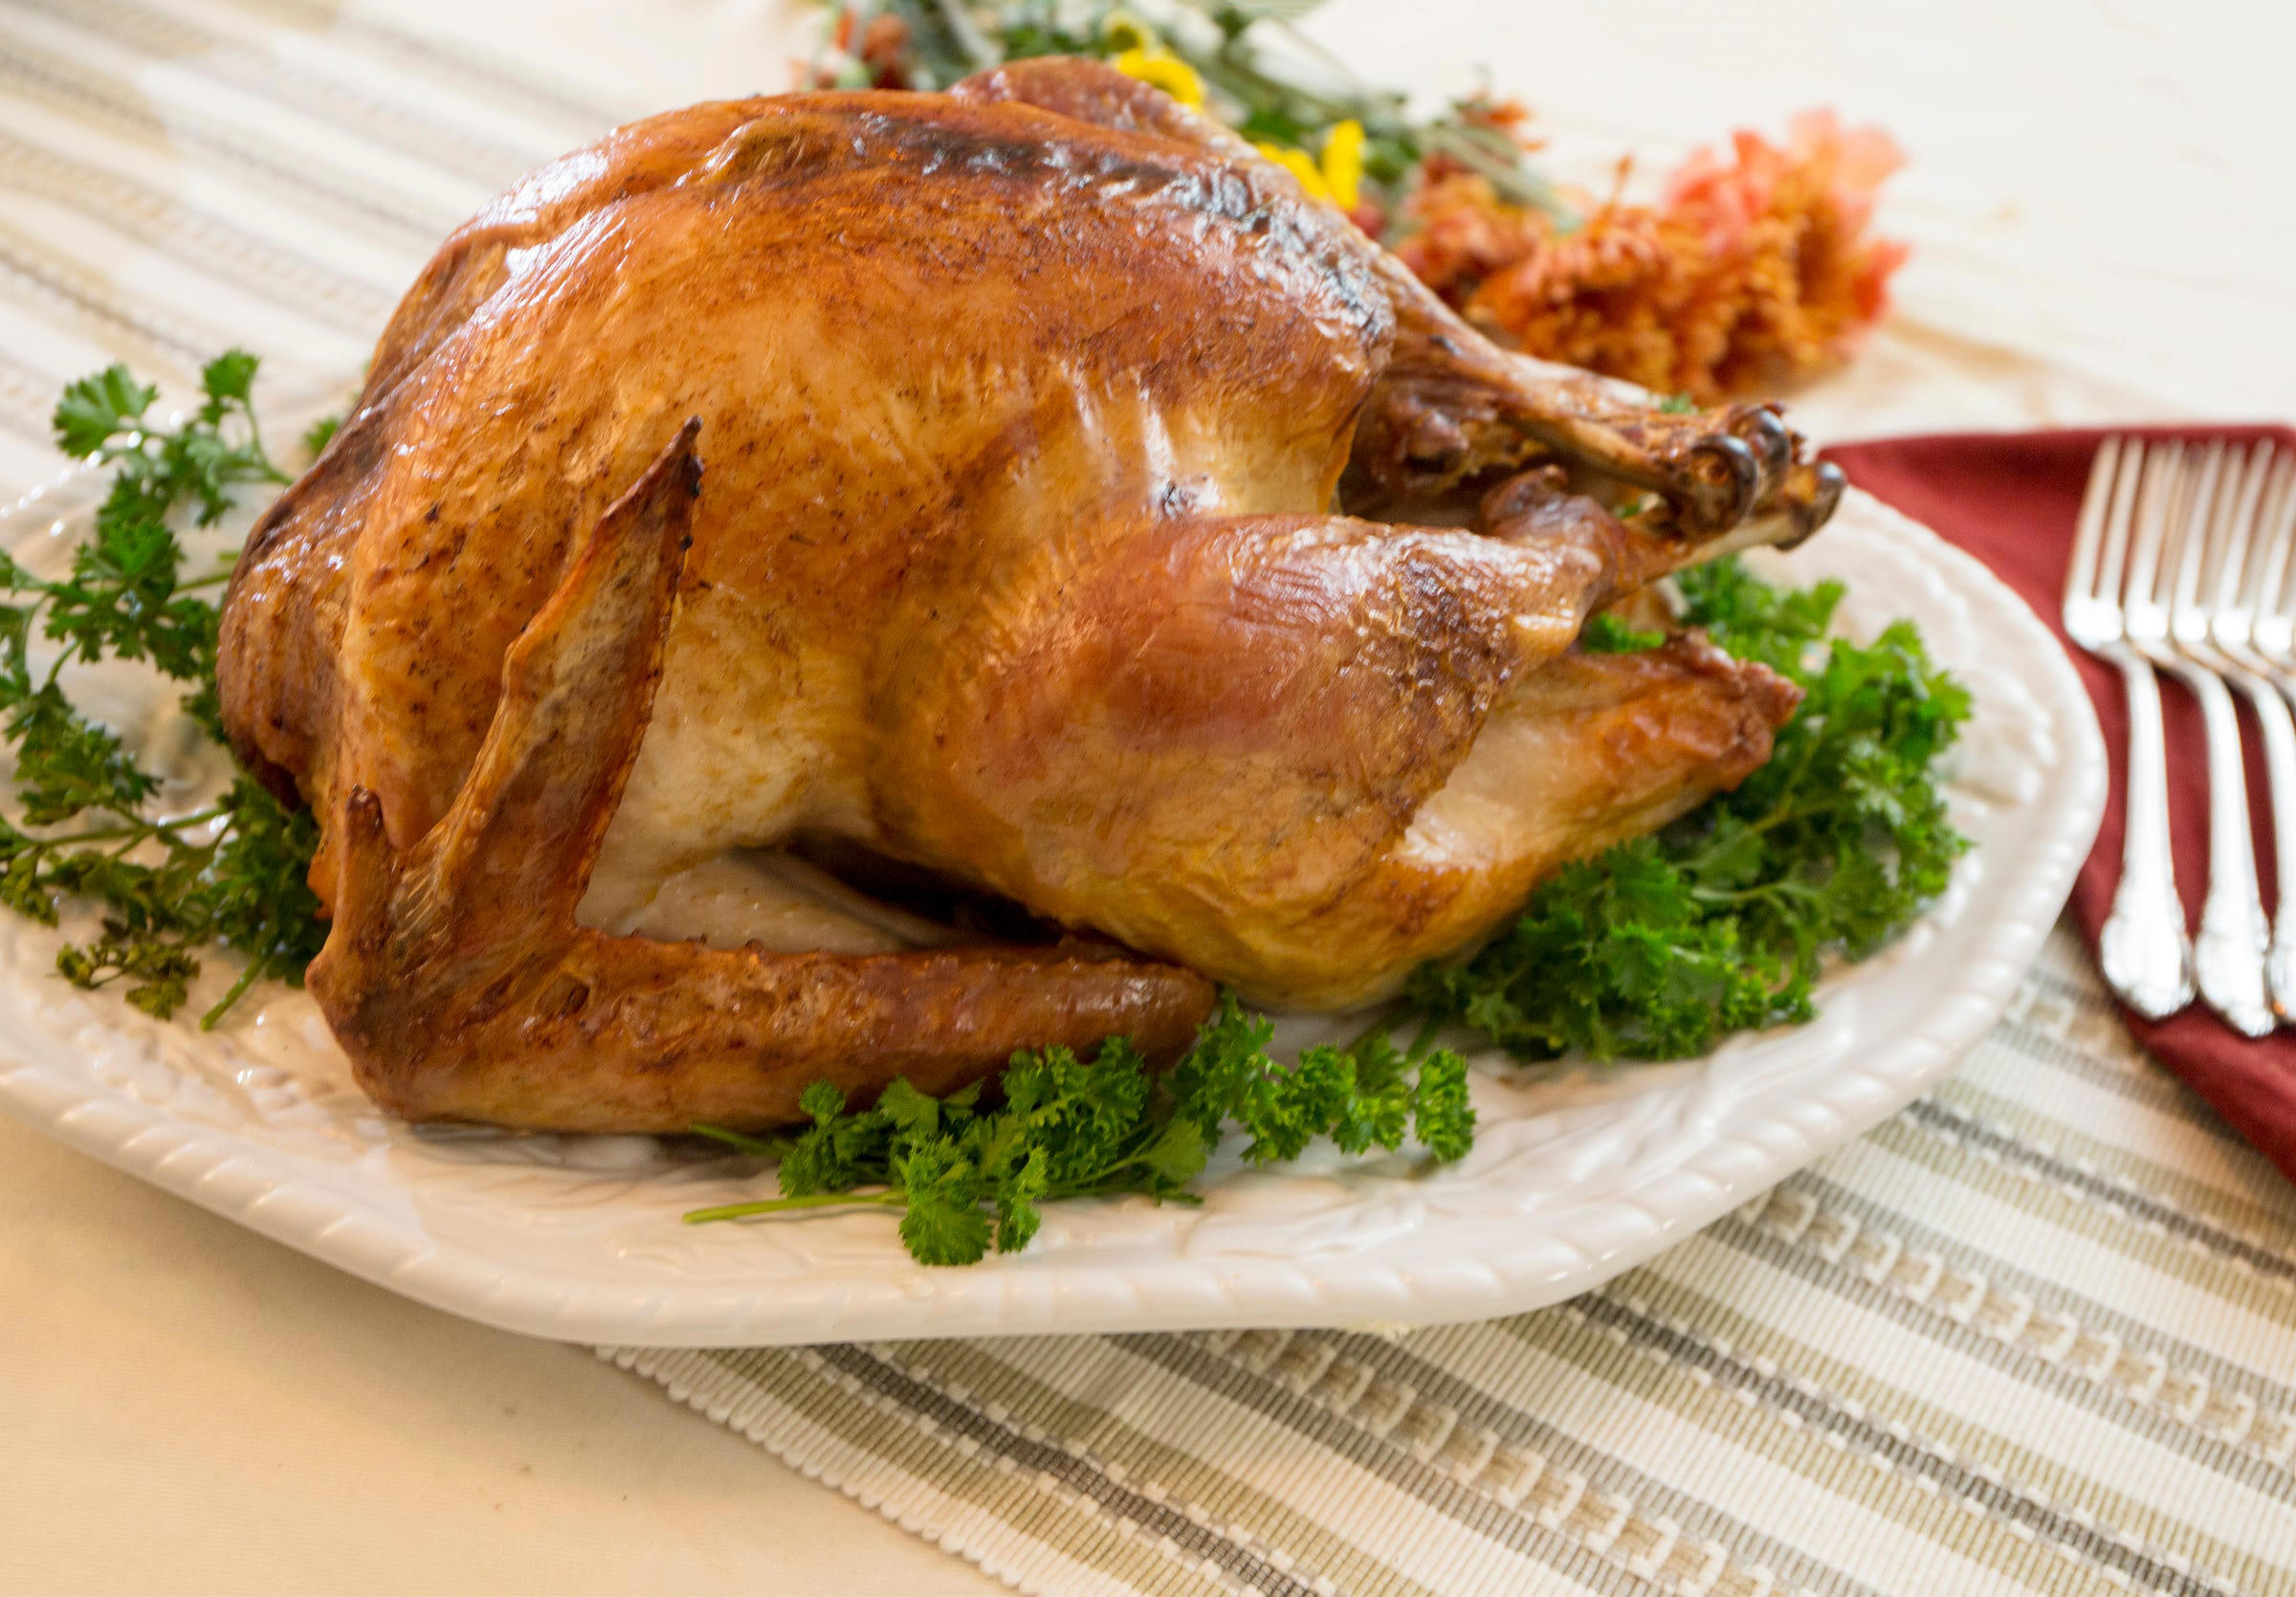 When To Take The Turkey Out Of The Freezer When To Defrost Turkey Tips For Thanksgiving